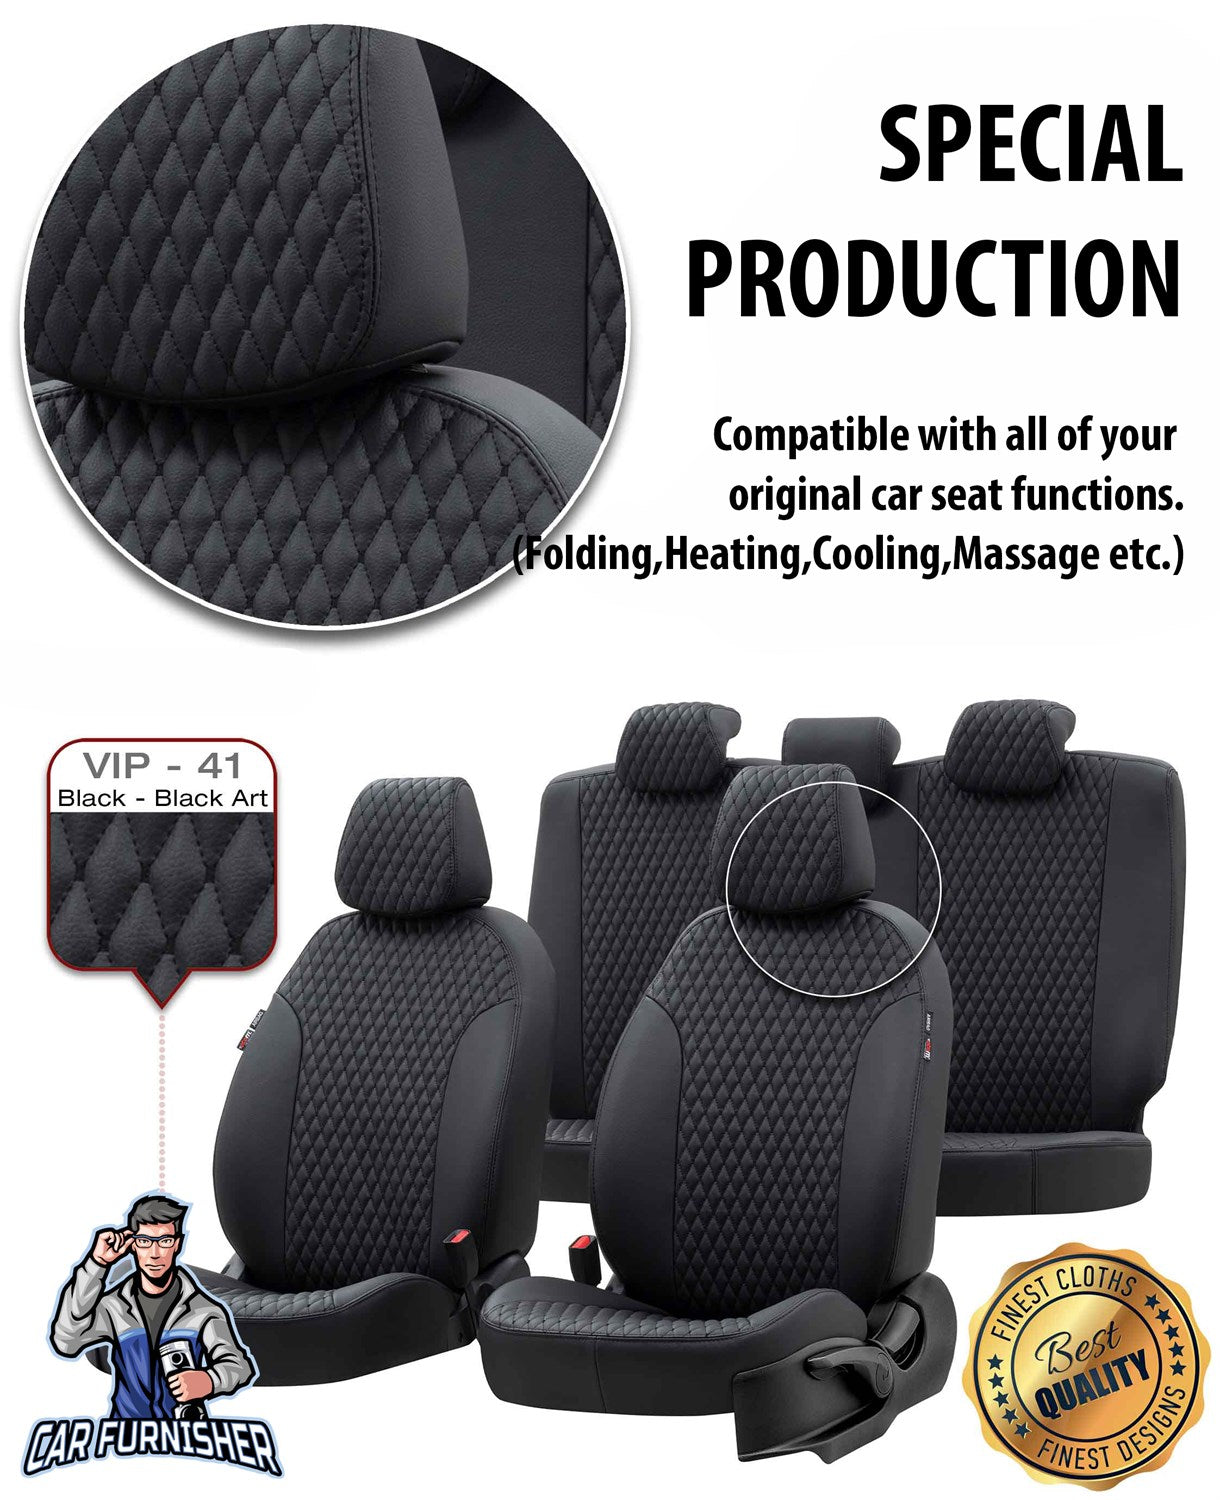 Man TGS Seat Cover Amsterdam Leather Design Dark Gray Front Seats (2 Seats + Handrest + Headrests) Leather